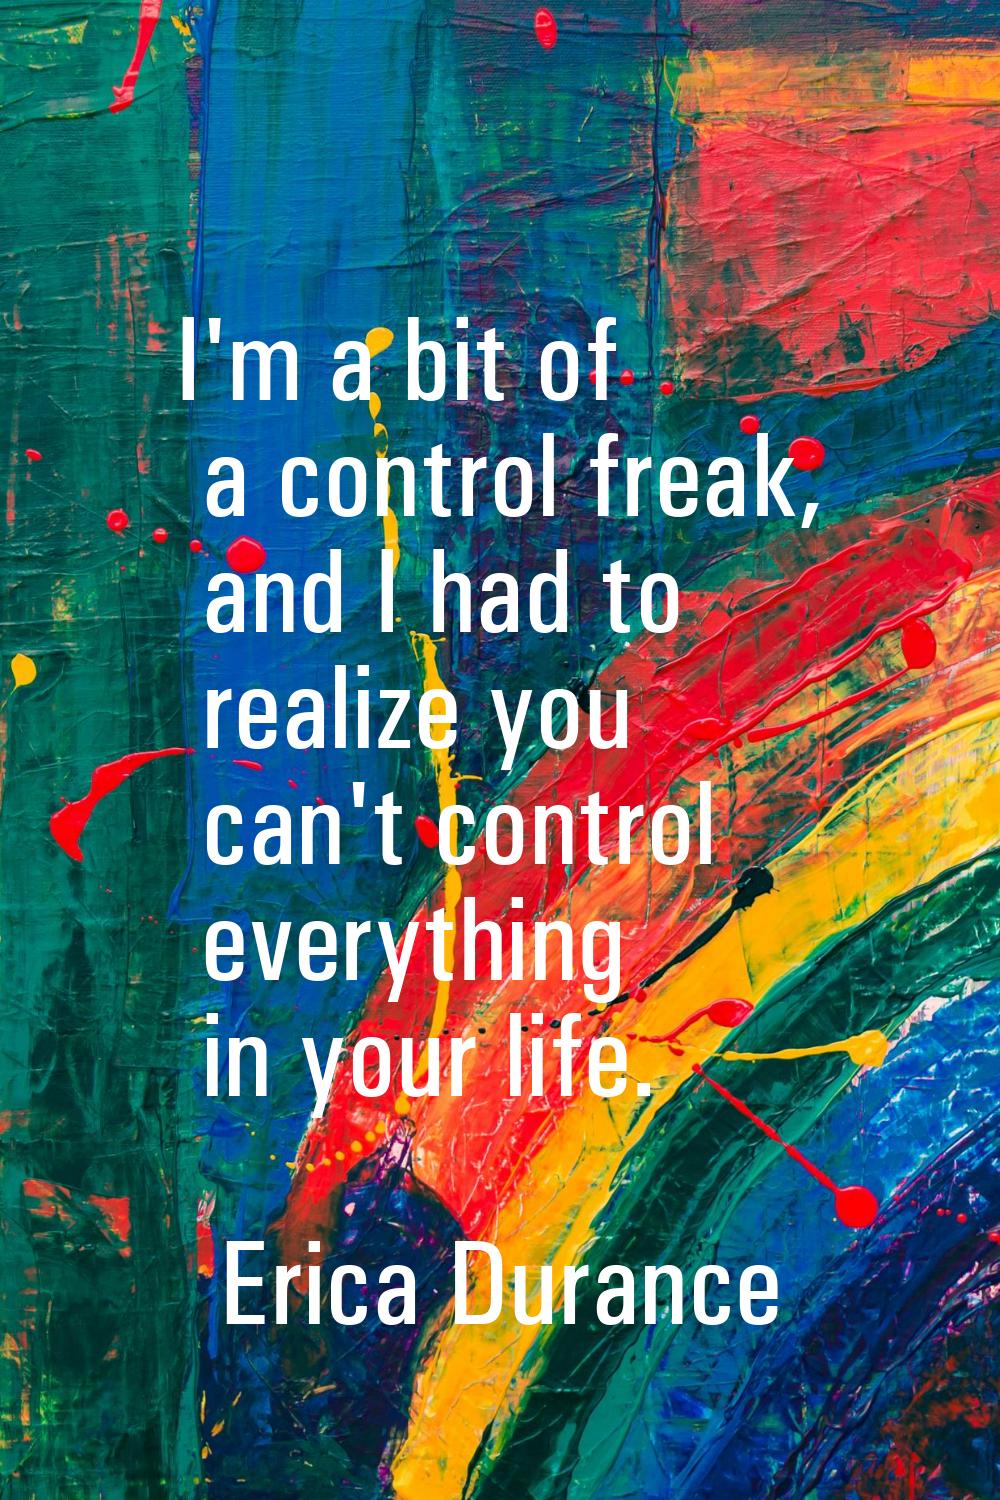 I'm a bit of a control freak, and I had to realize you can't control everything in your life.